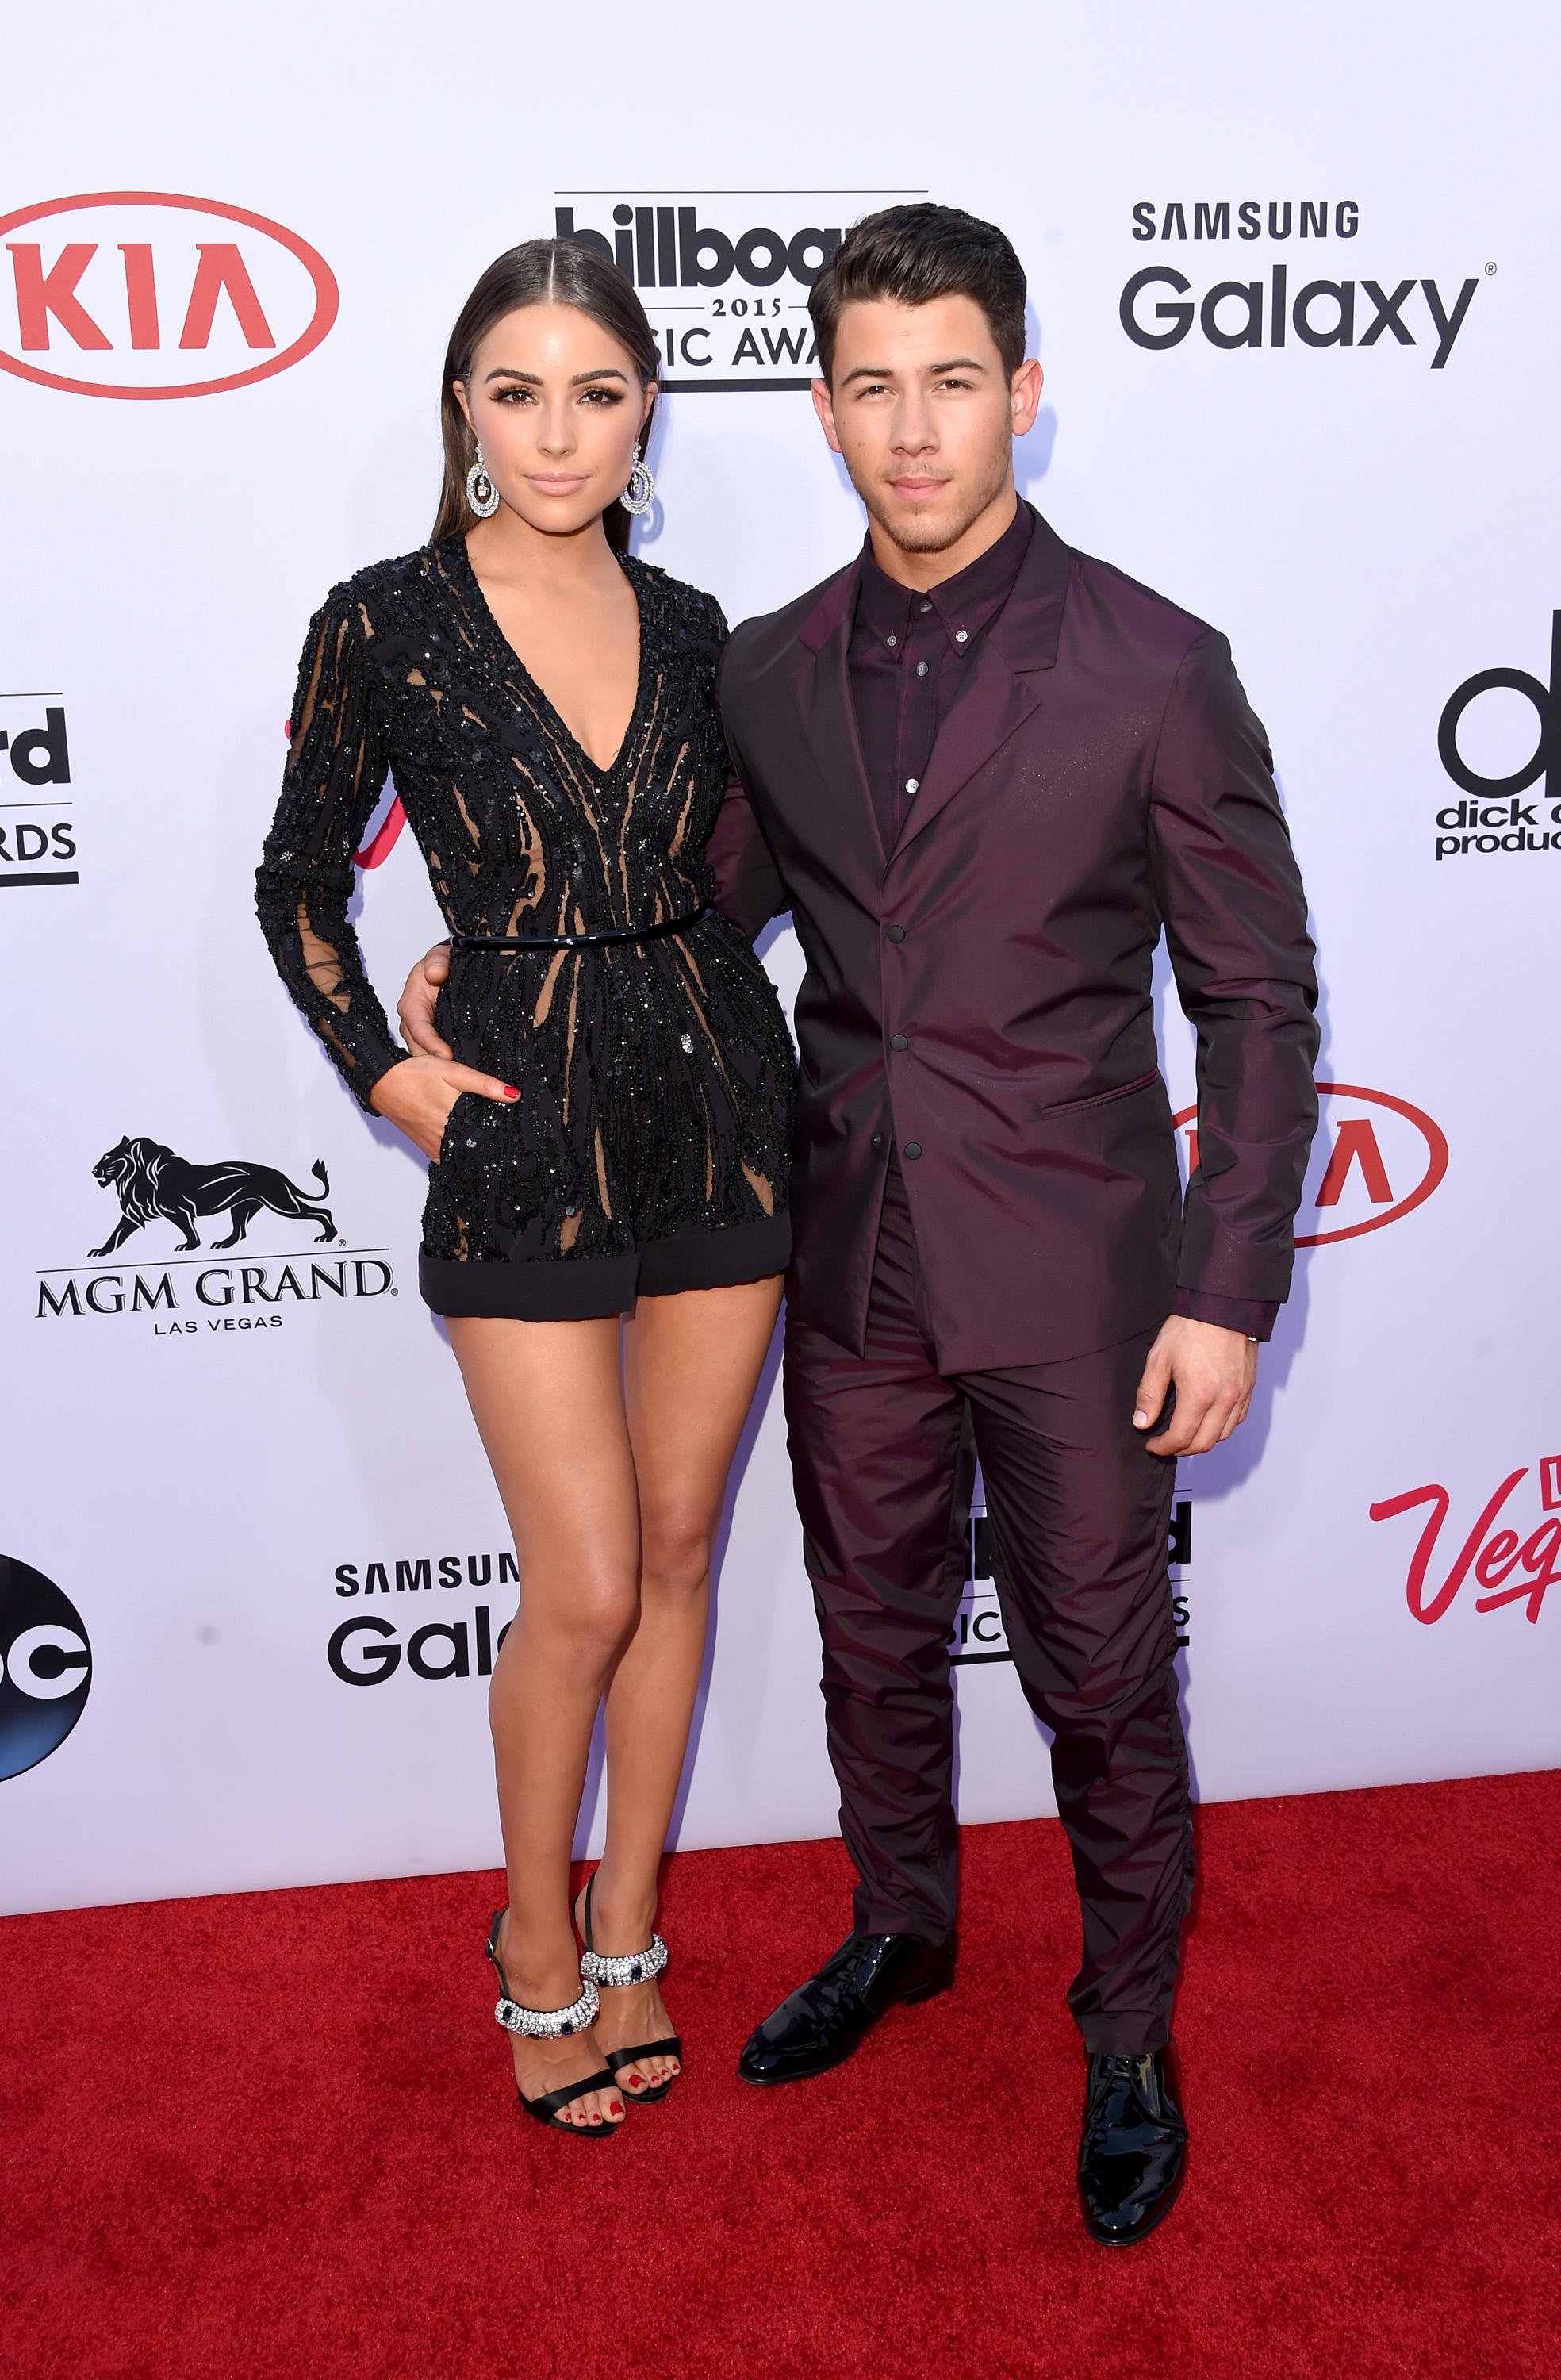 LAS VEGAS, NV - MAY 17:  Singer Nick Jonas (R) and model Olivia Culpo attend the 2015 Billboard Music Awards at MGM Grand Garden Arena on May 17, 2015 in Las Vegas, Nevada.  (Photo by Jason Merritt/Getty Images)